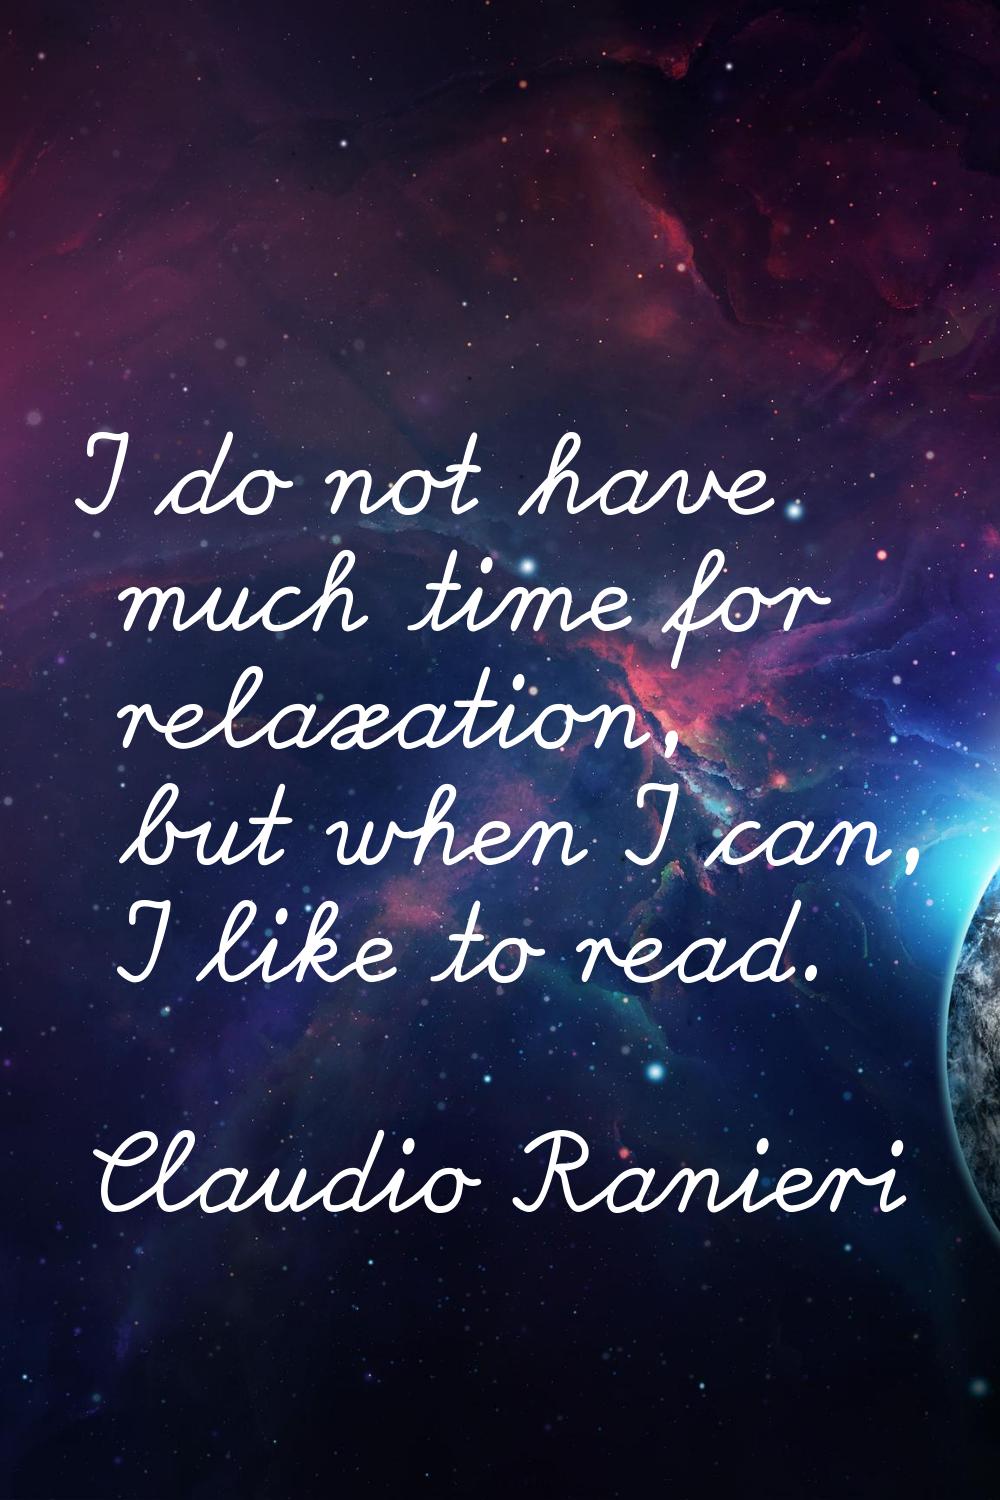 I do not have much time for relaxation, but when I can, I like to read.